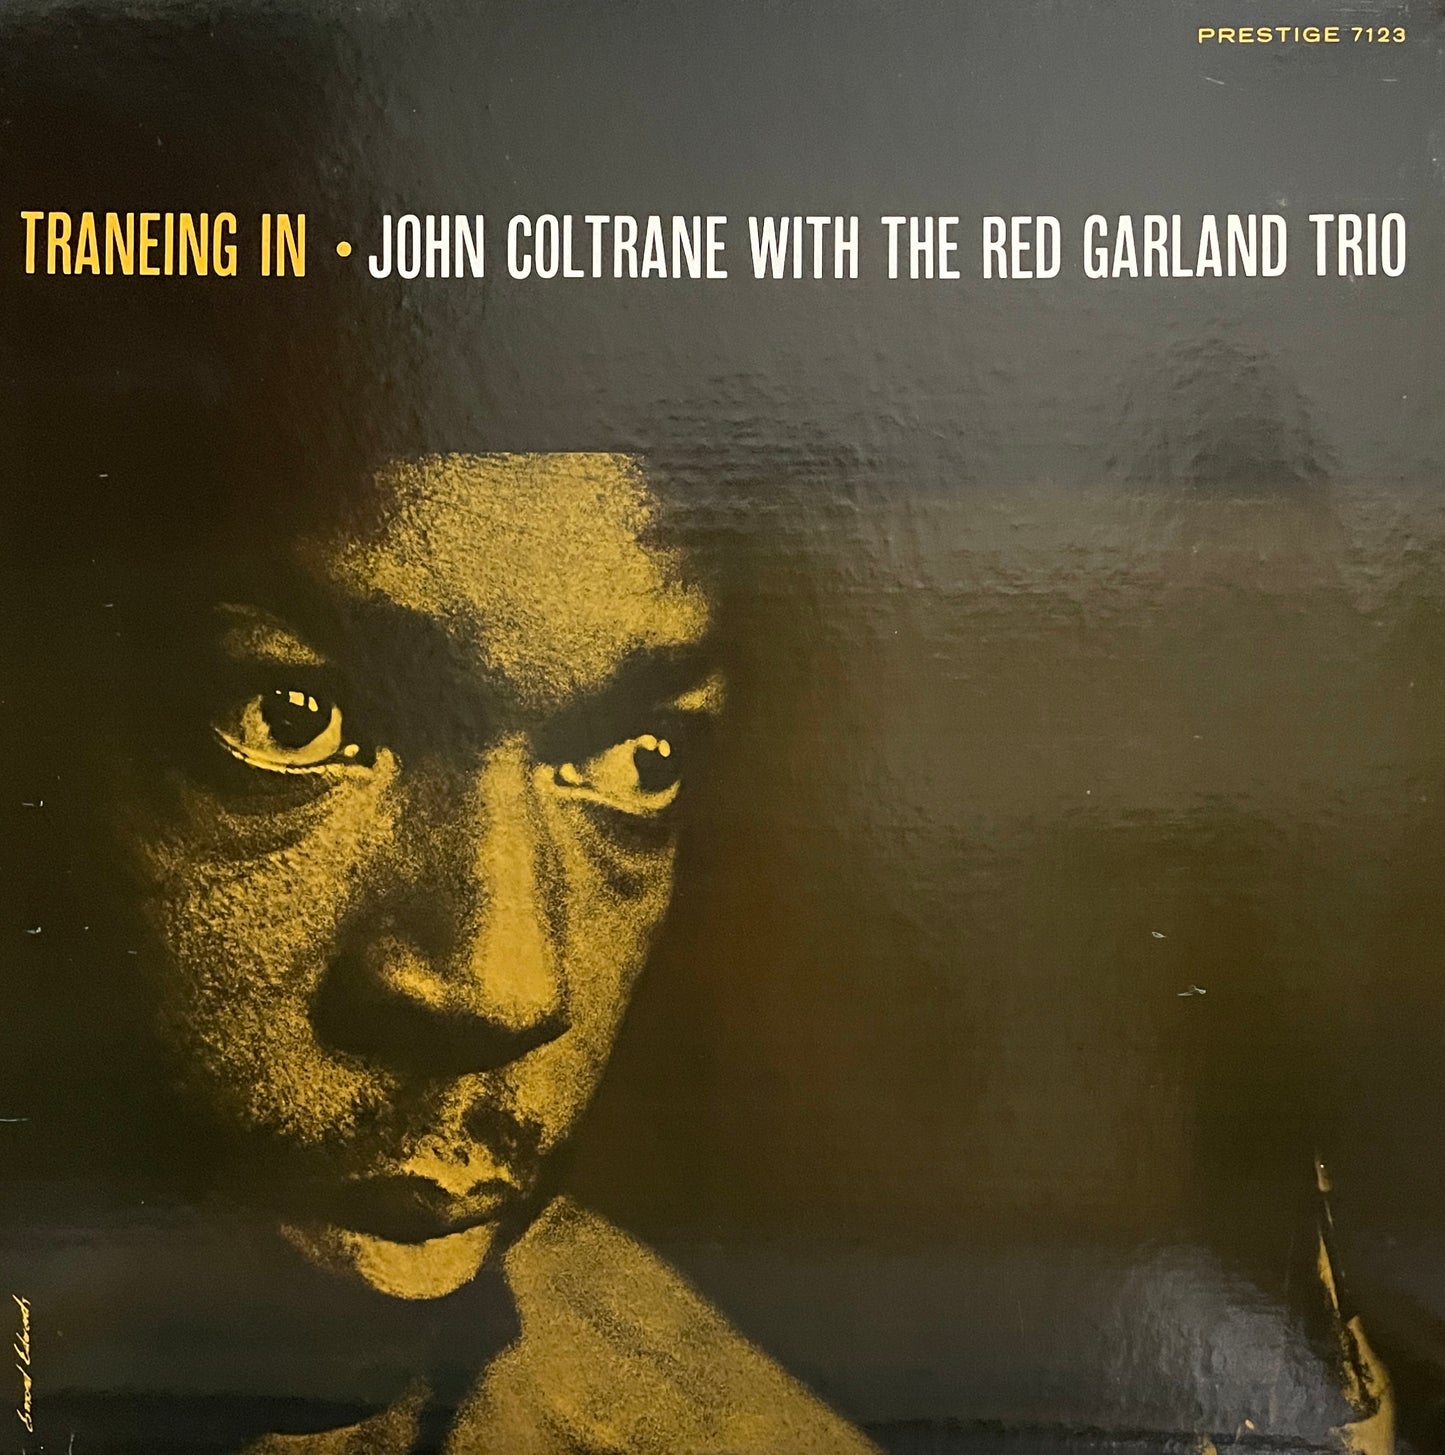 John Coltrane With The Red Garland Trio "Traneing In' (1985)